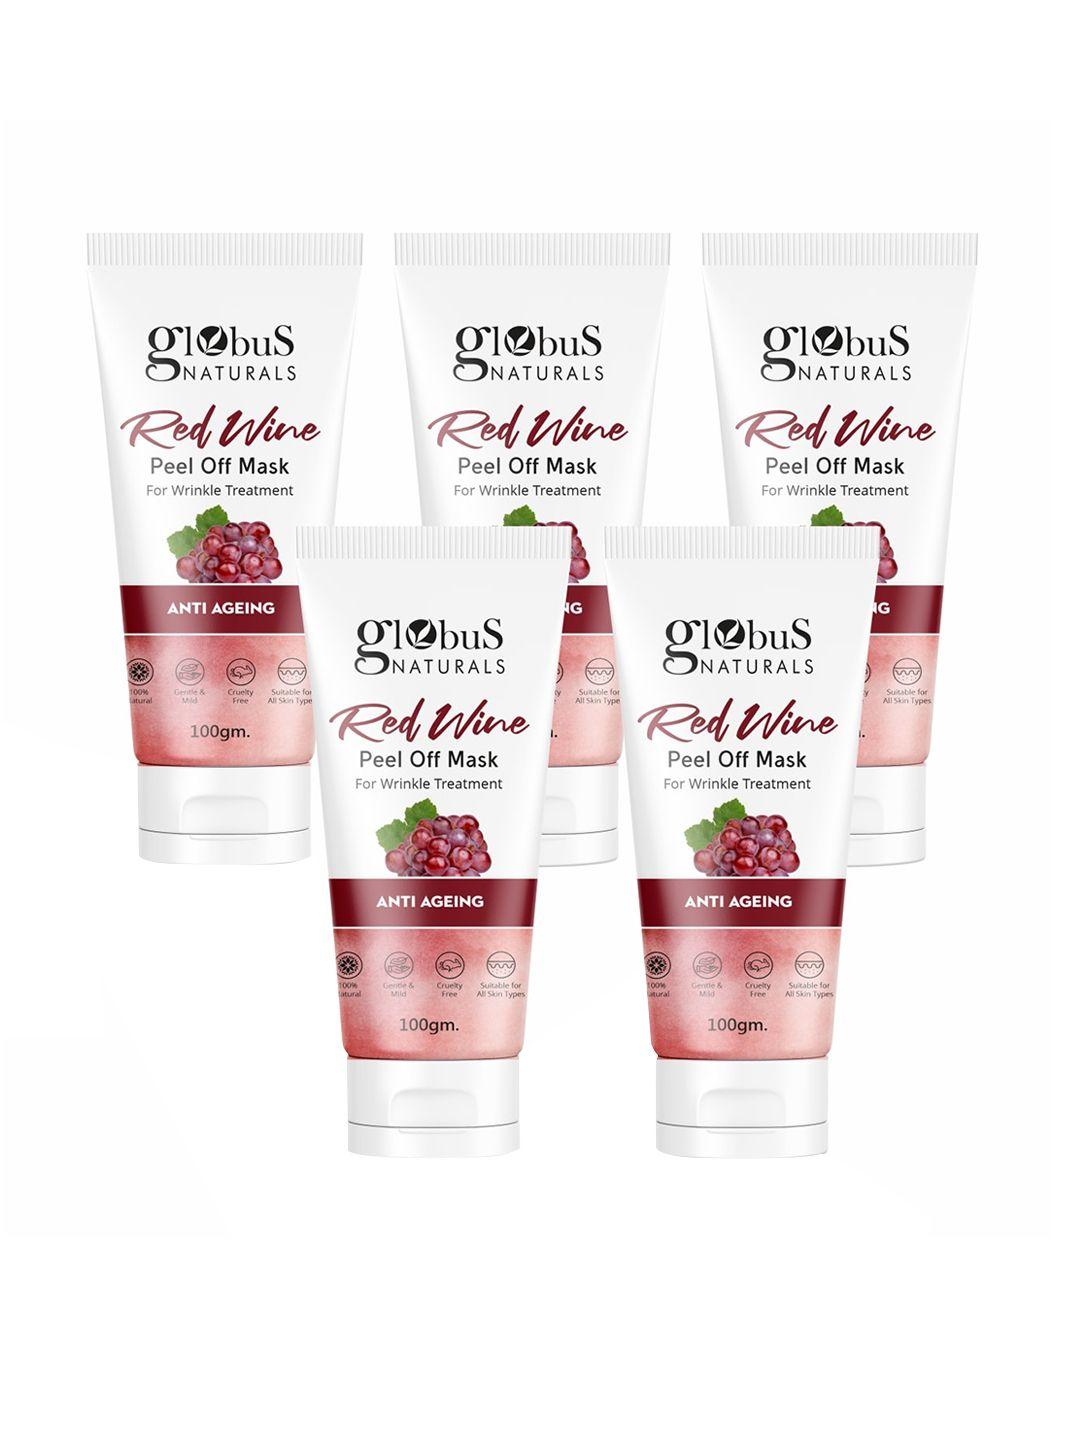 globus naturals set of 5 red wine peel off mask for wrinkle treatment -100geach